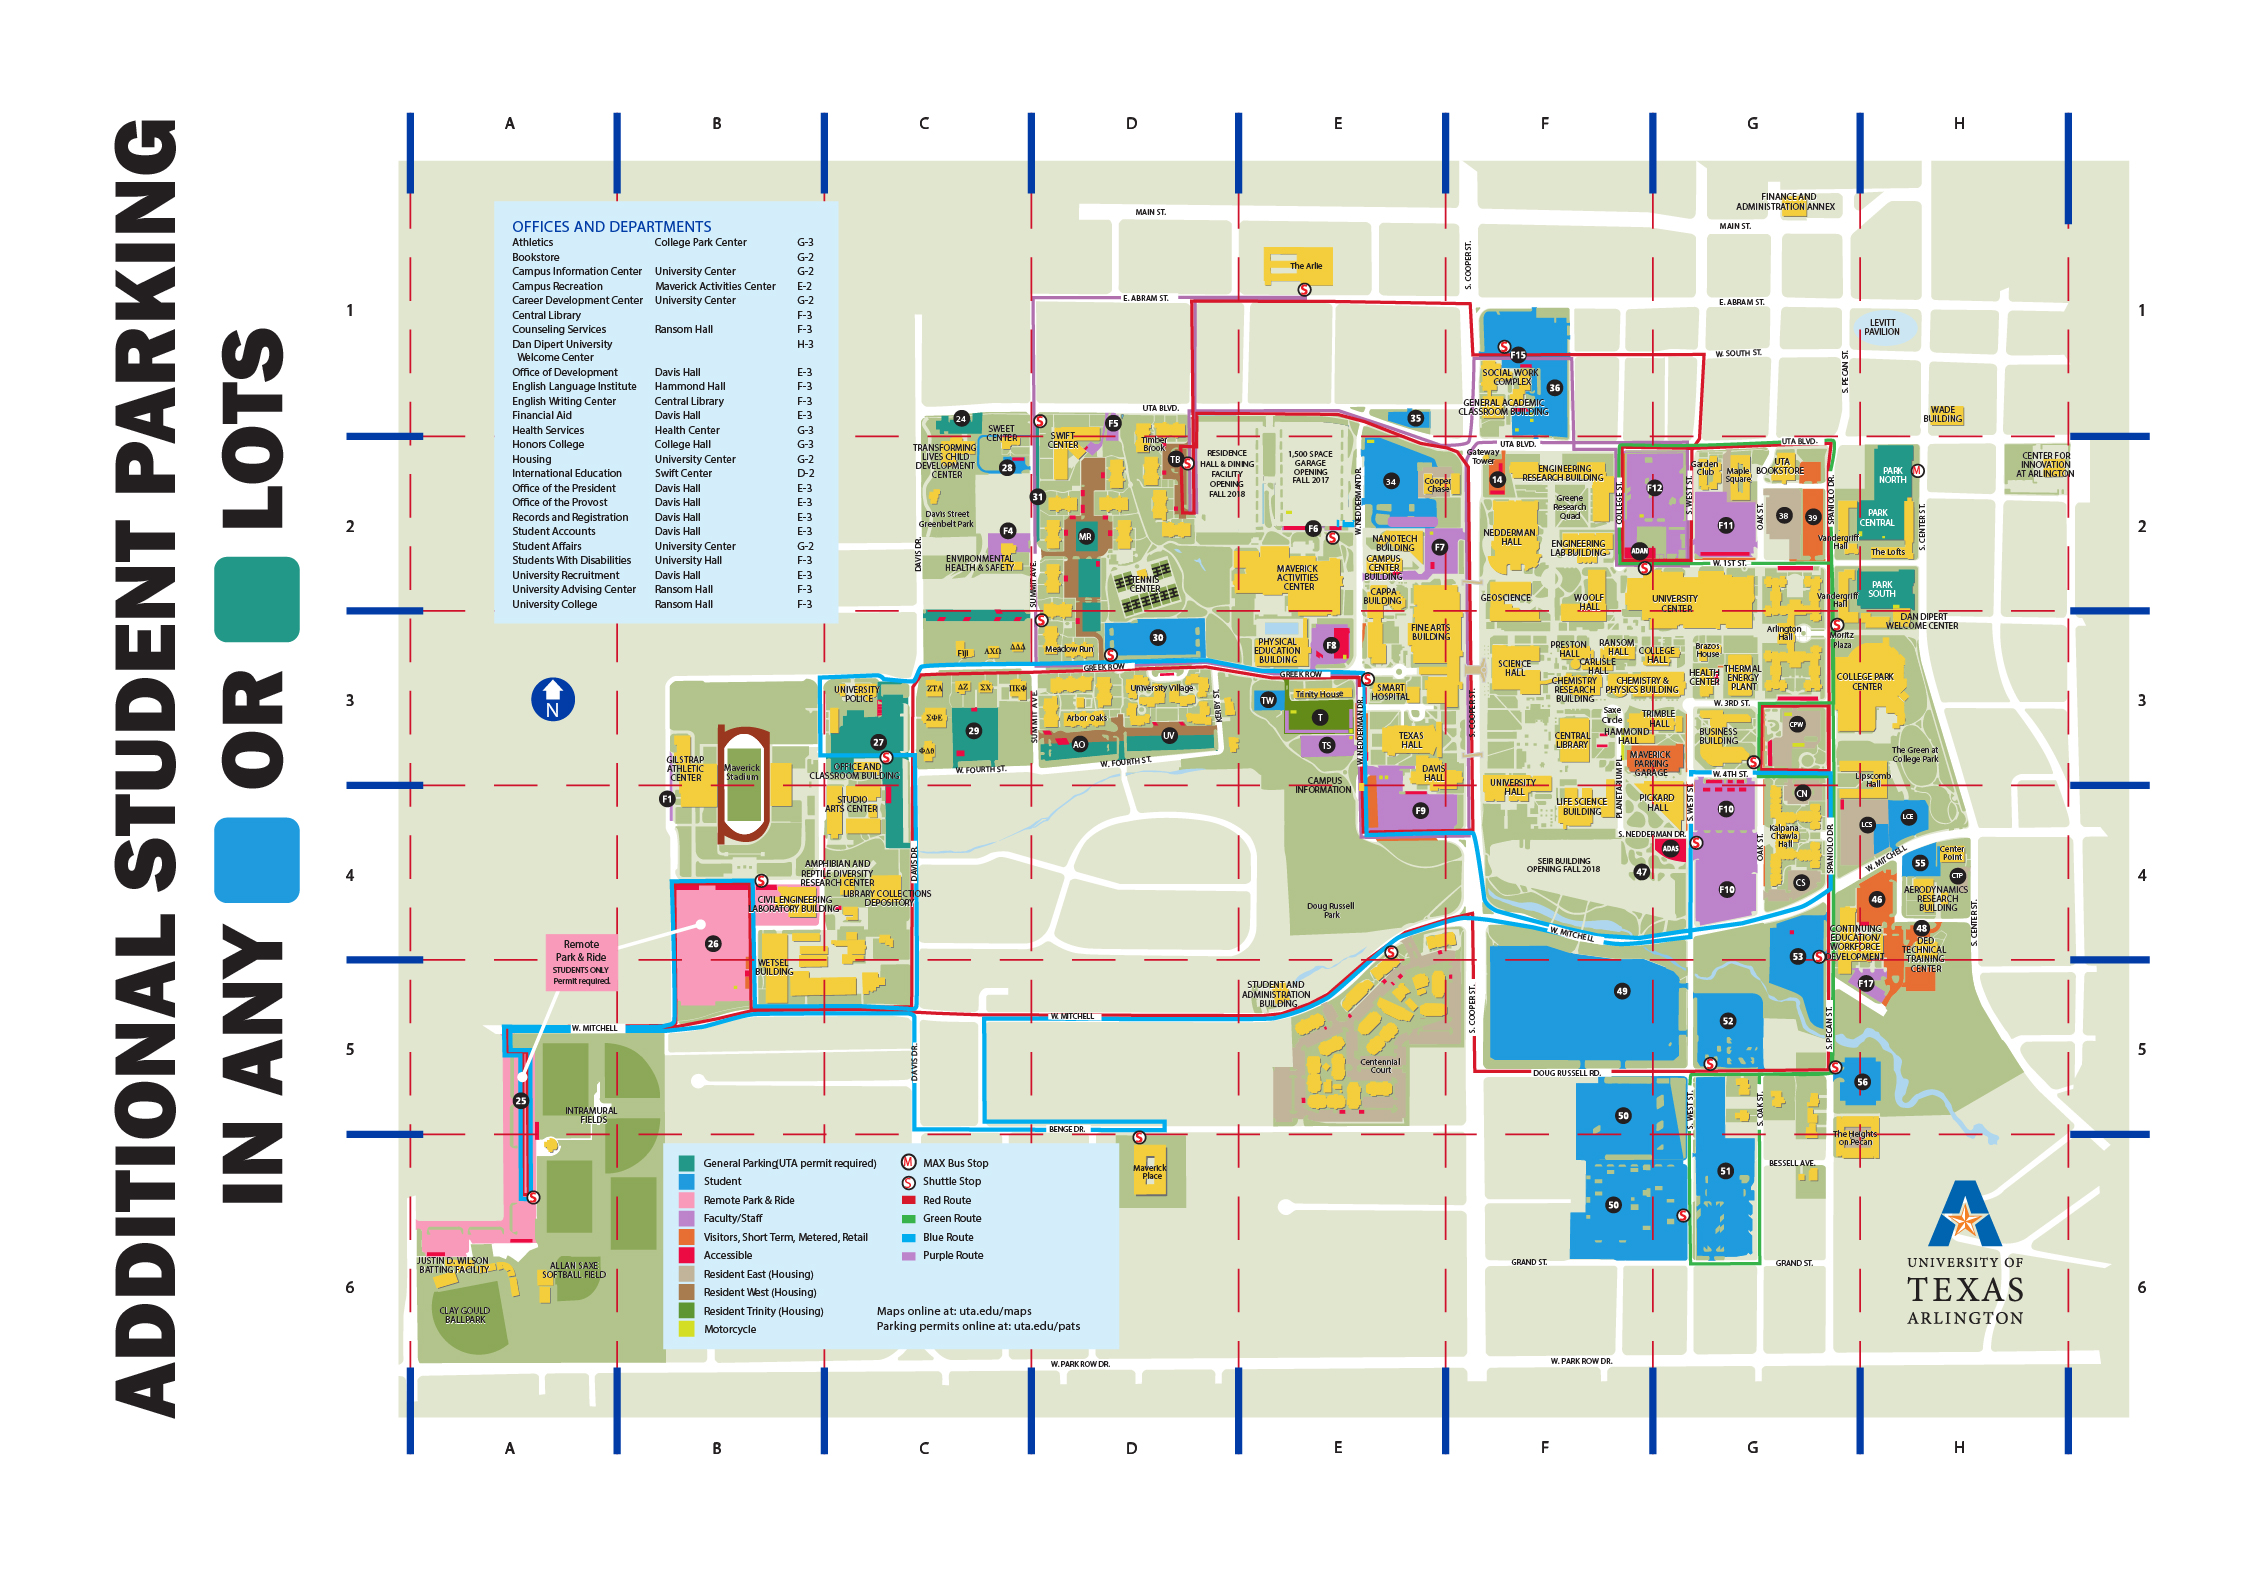 Additional Student Parking Map